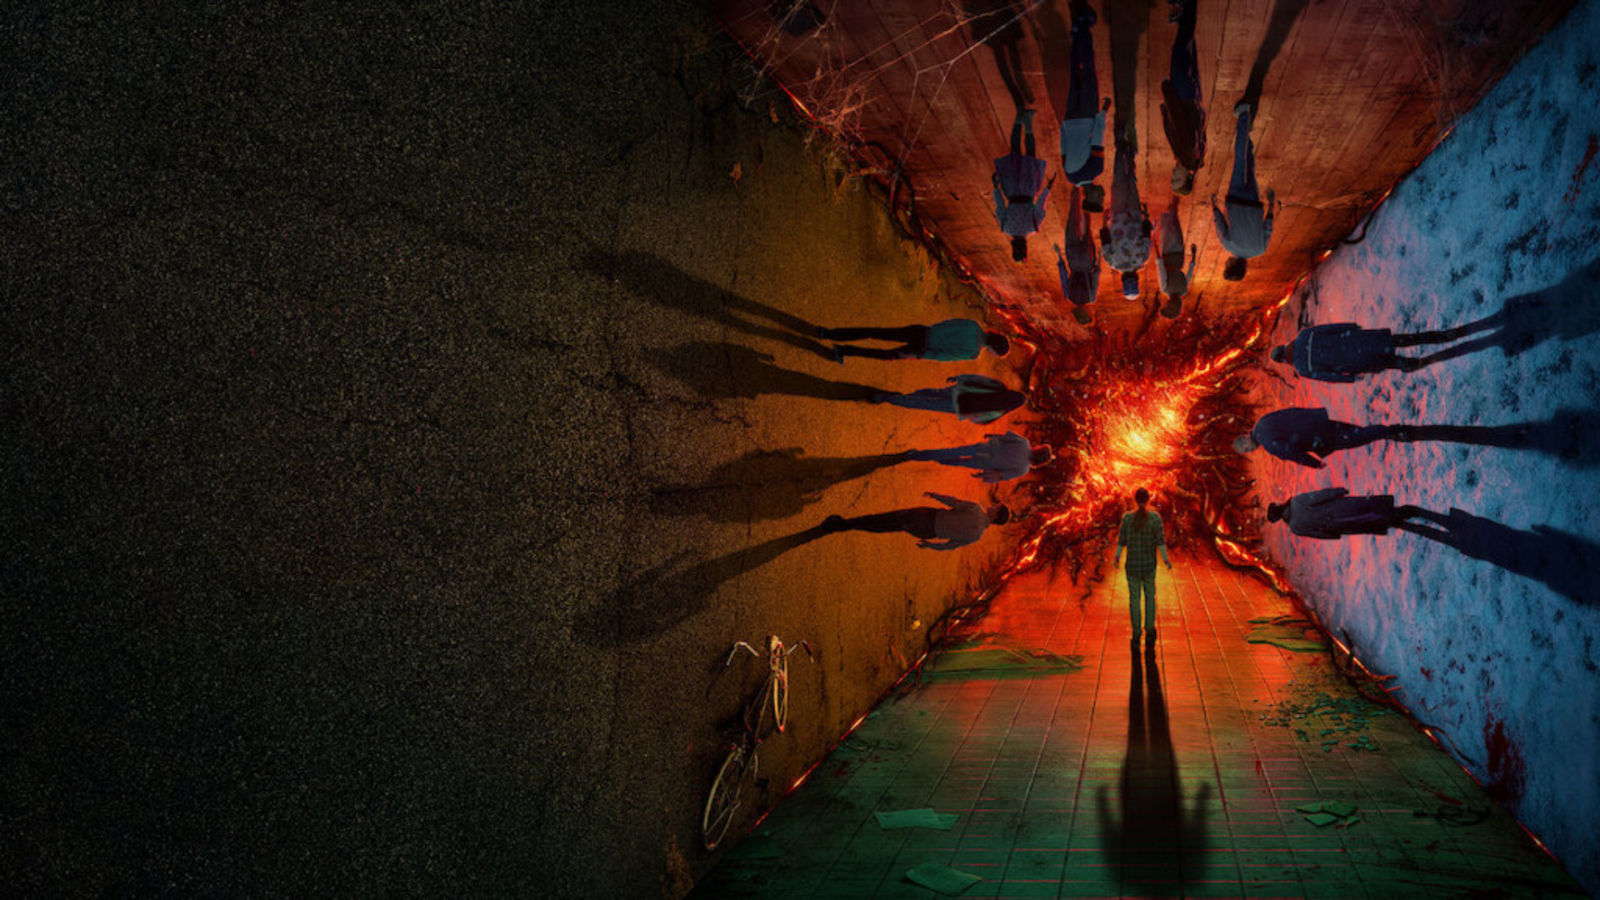 Duffer bros create Upside Down Pictures to make ‘Stranger Things’ spin-off, play for Netflix